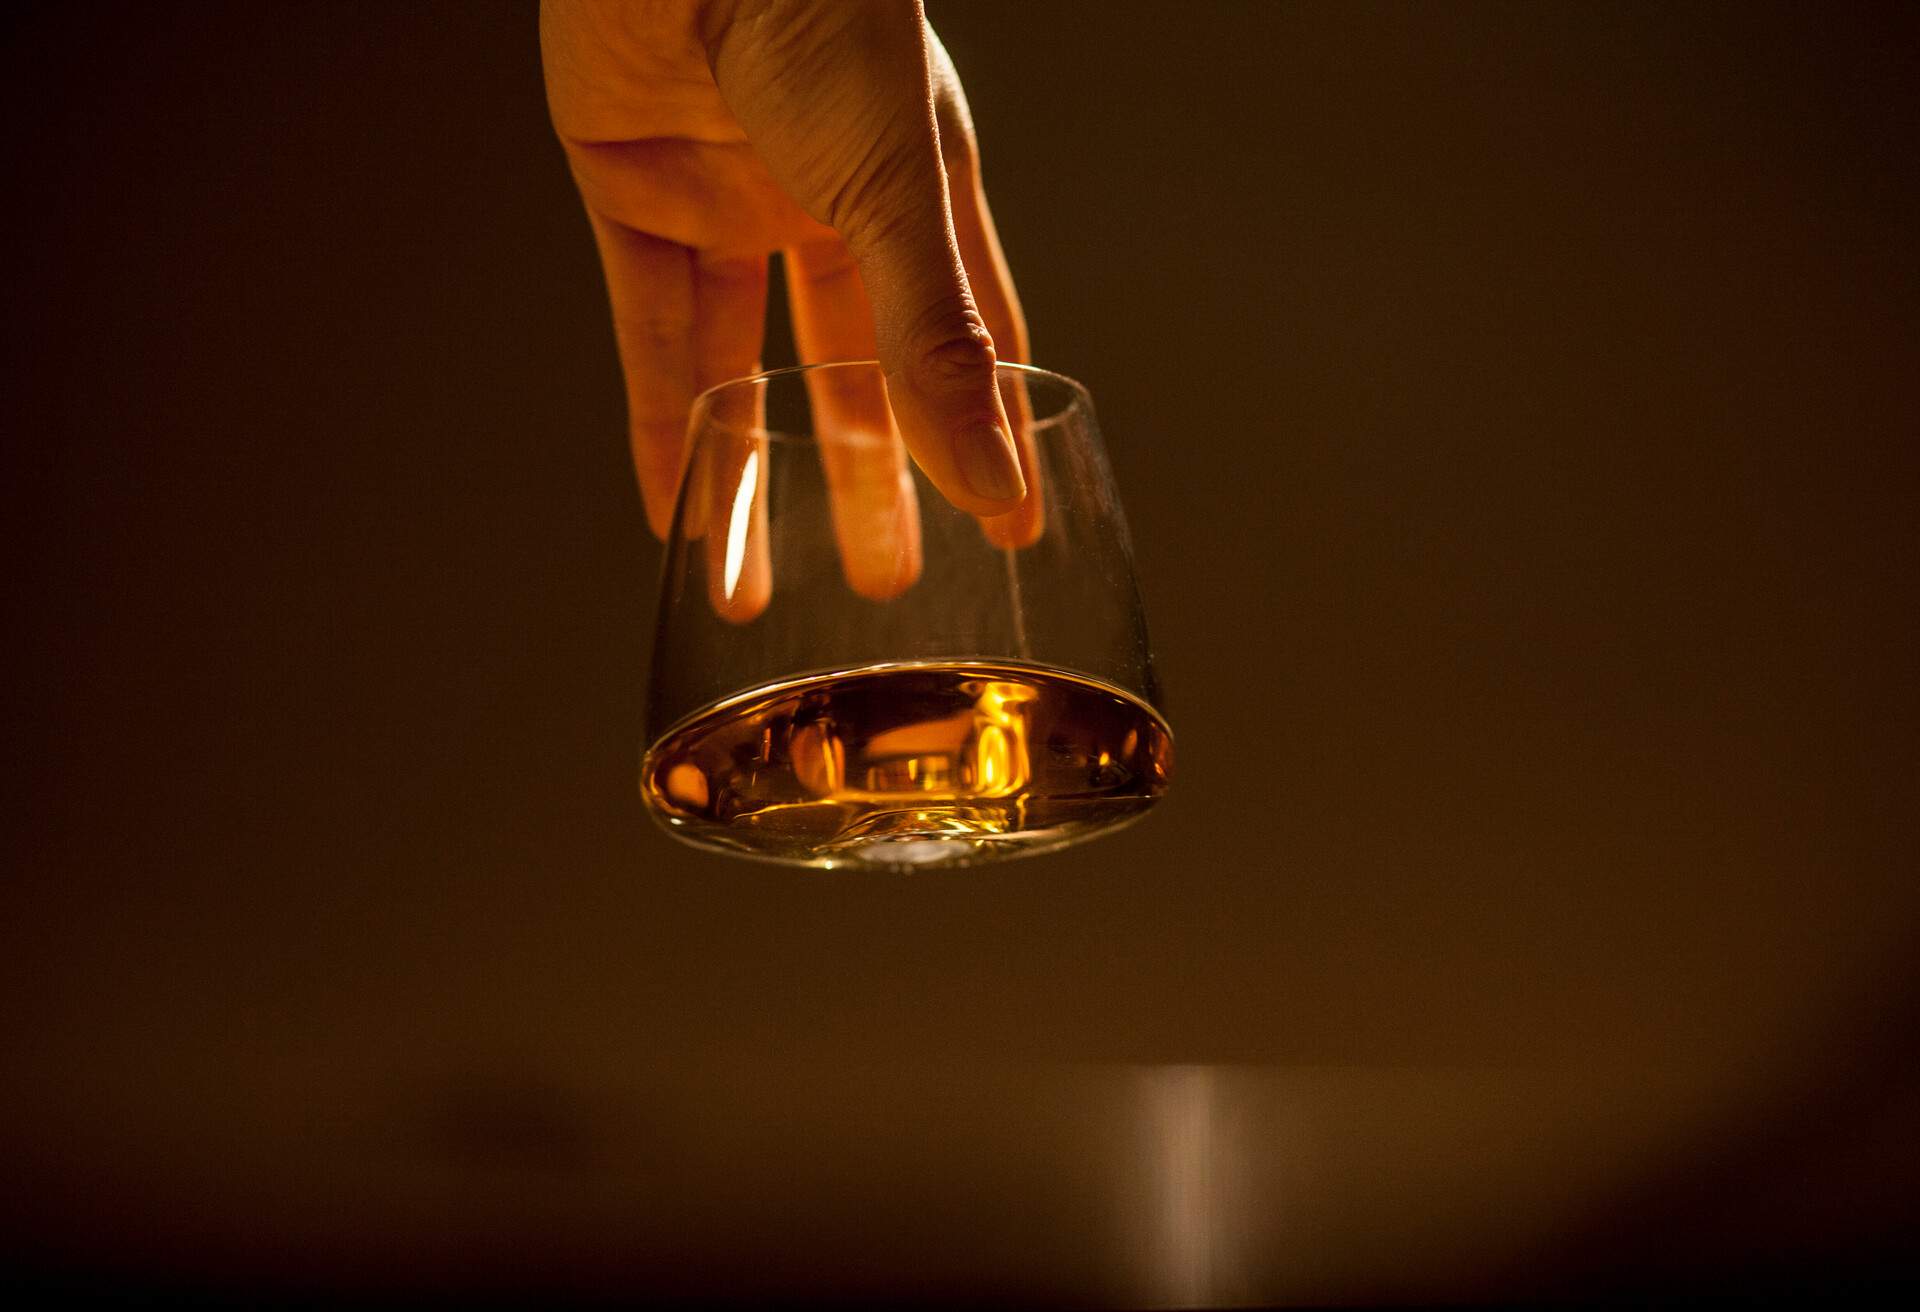 Portrait of a hand holding a transparent glass with golden liquor on a brownish background.